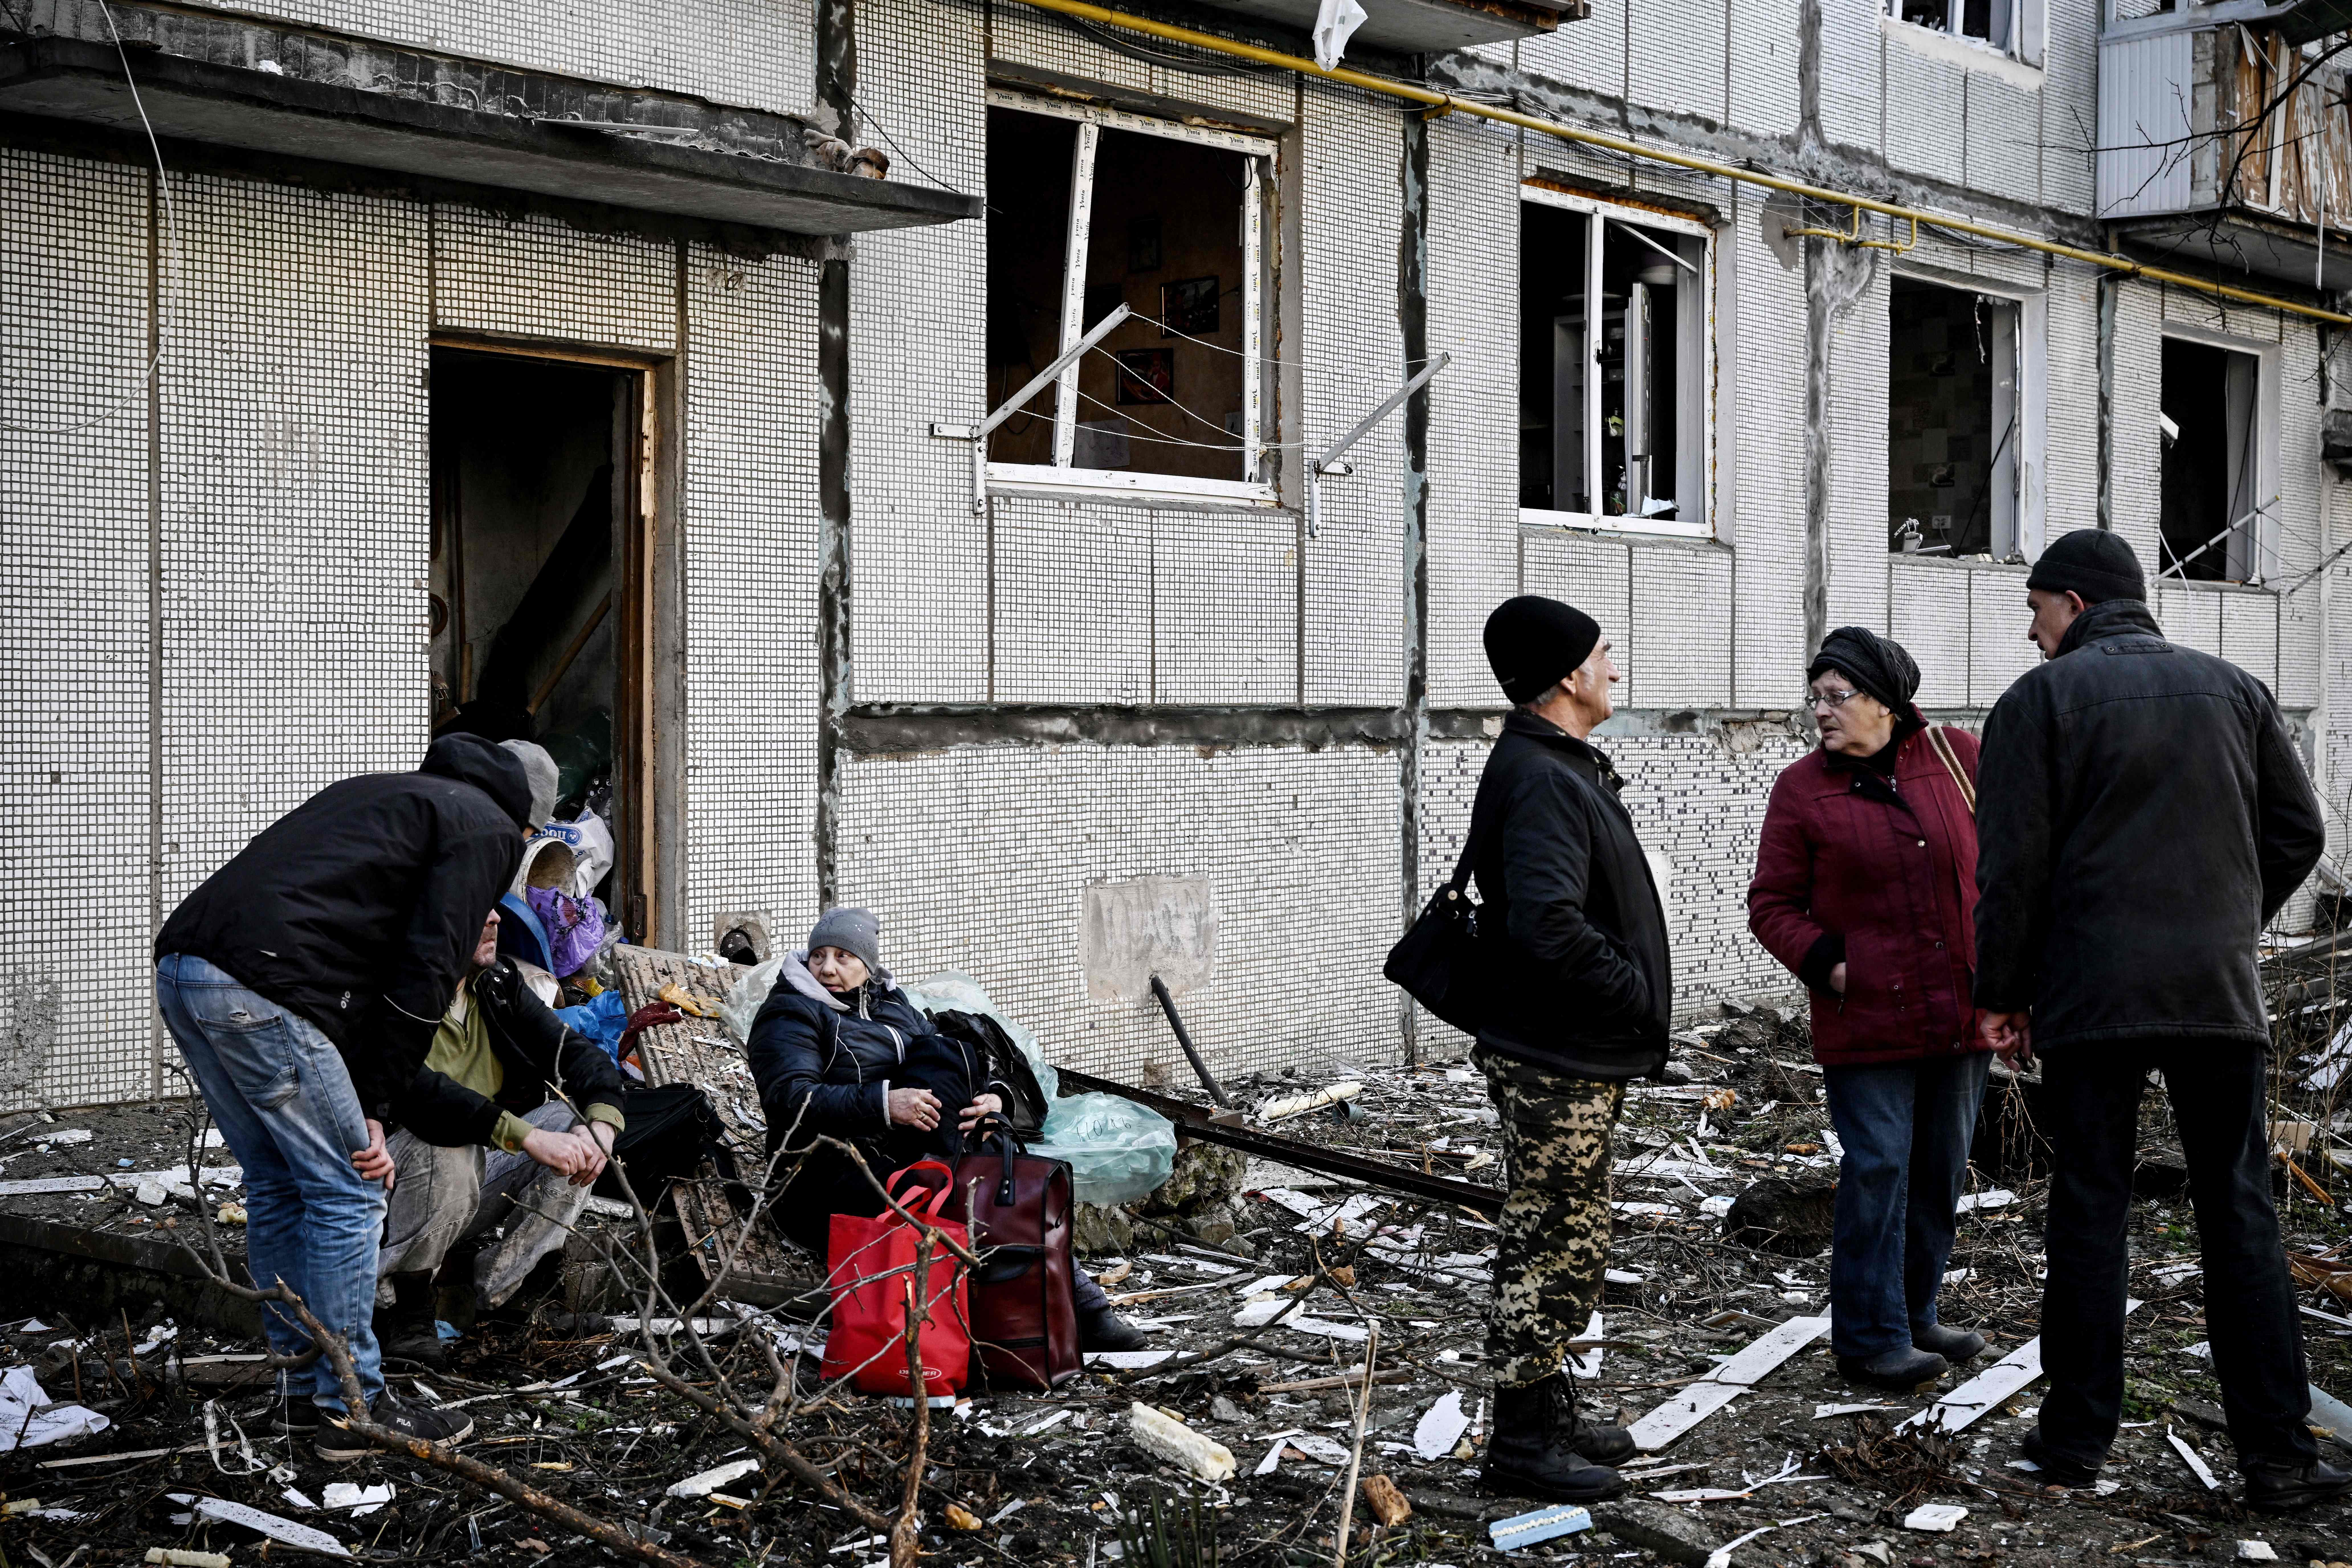 People stand outside a destroyed building after bombings on the eastern Ukraine town of Chuguiv on February 24, 2022